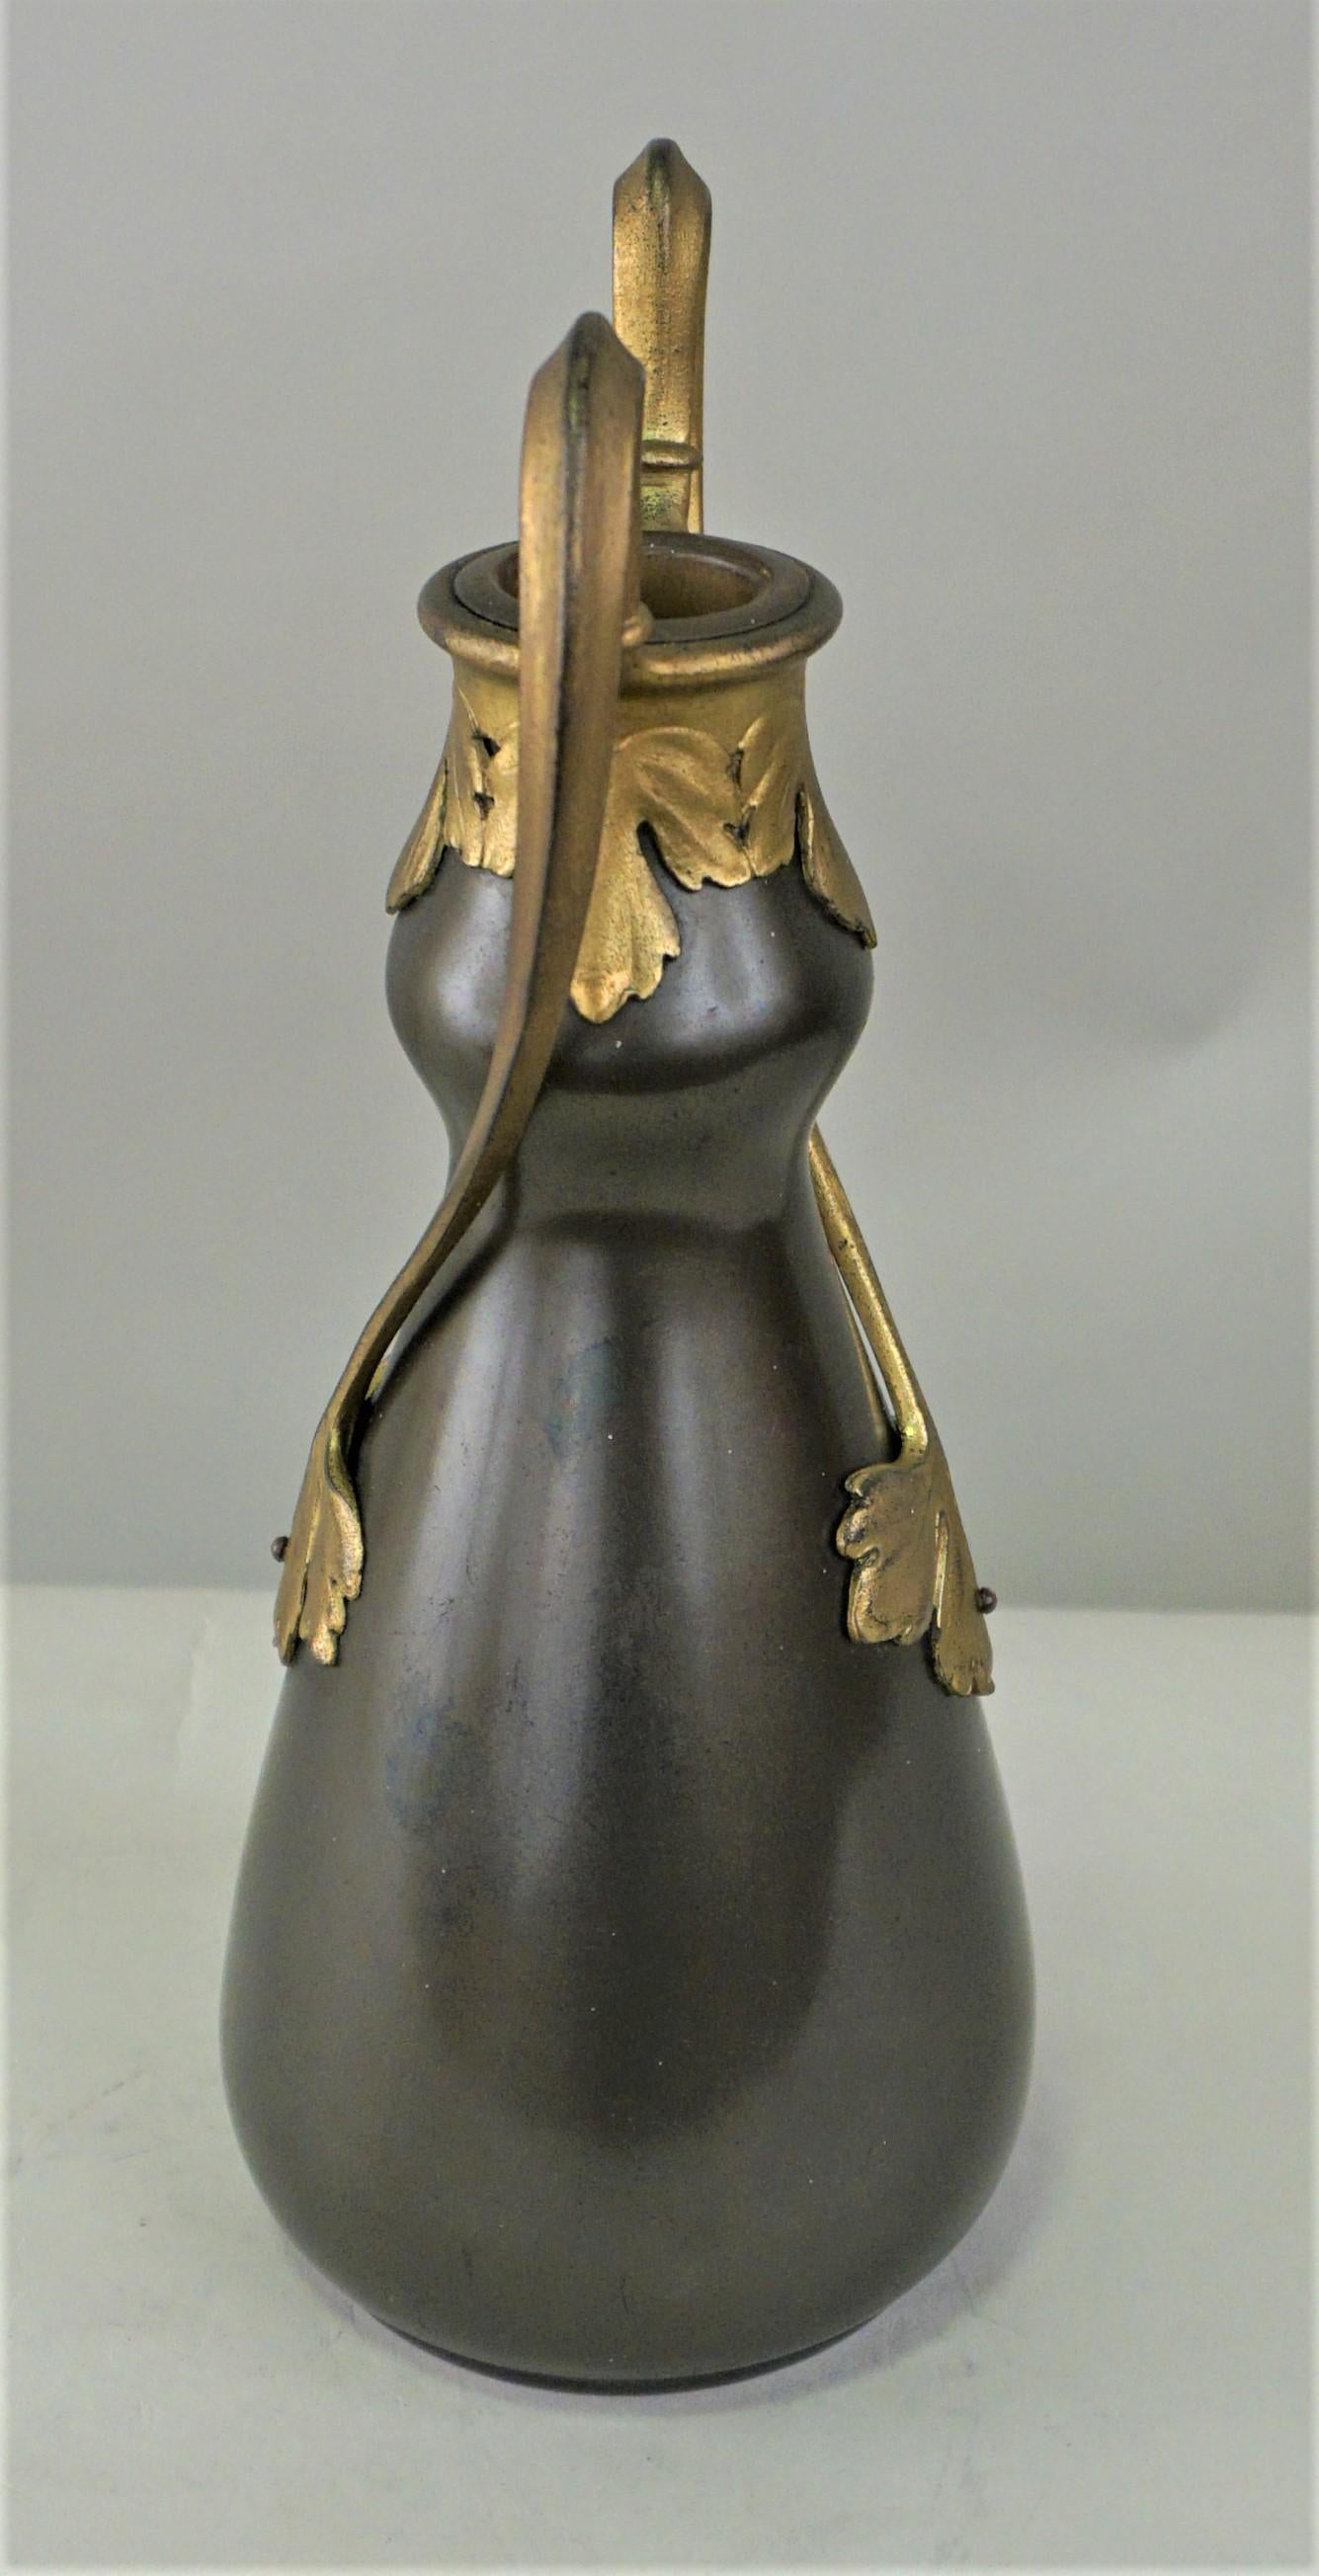 Early 20th century simple but elegant gold and brown finish Art Nouveau vase.